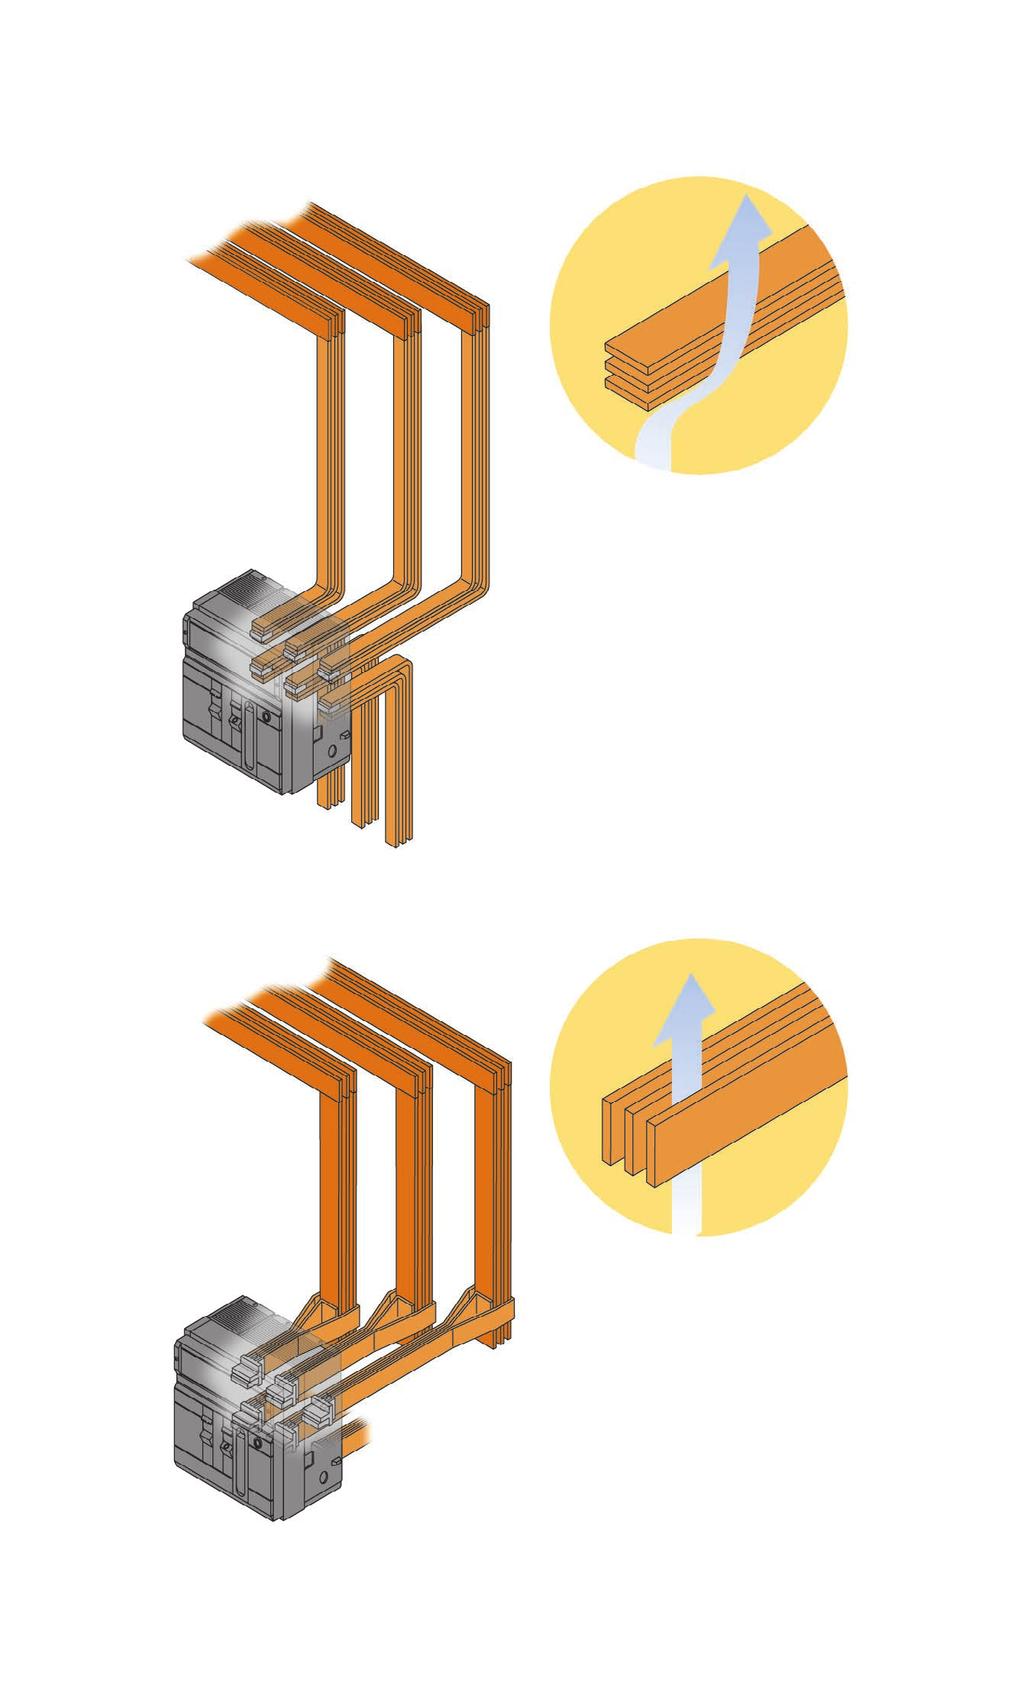 Here are some practical considerations regarding use and installation modalities of vertical rear terminals for Emax series circuit-breakers.